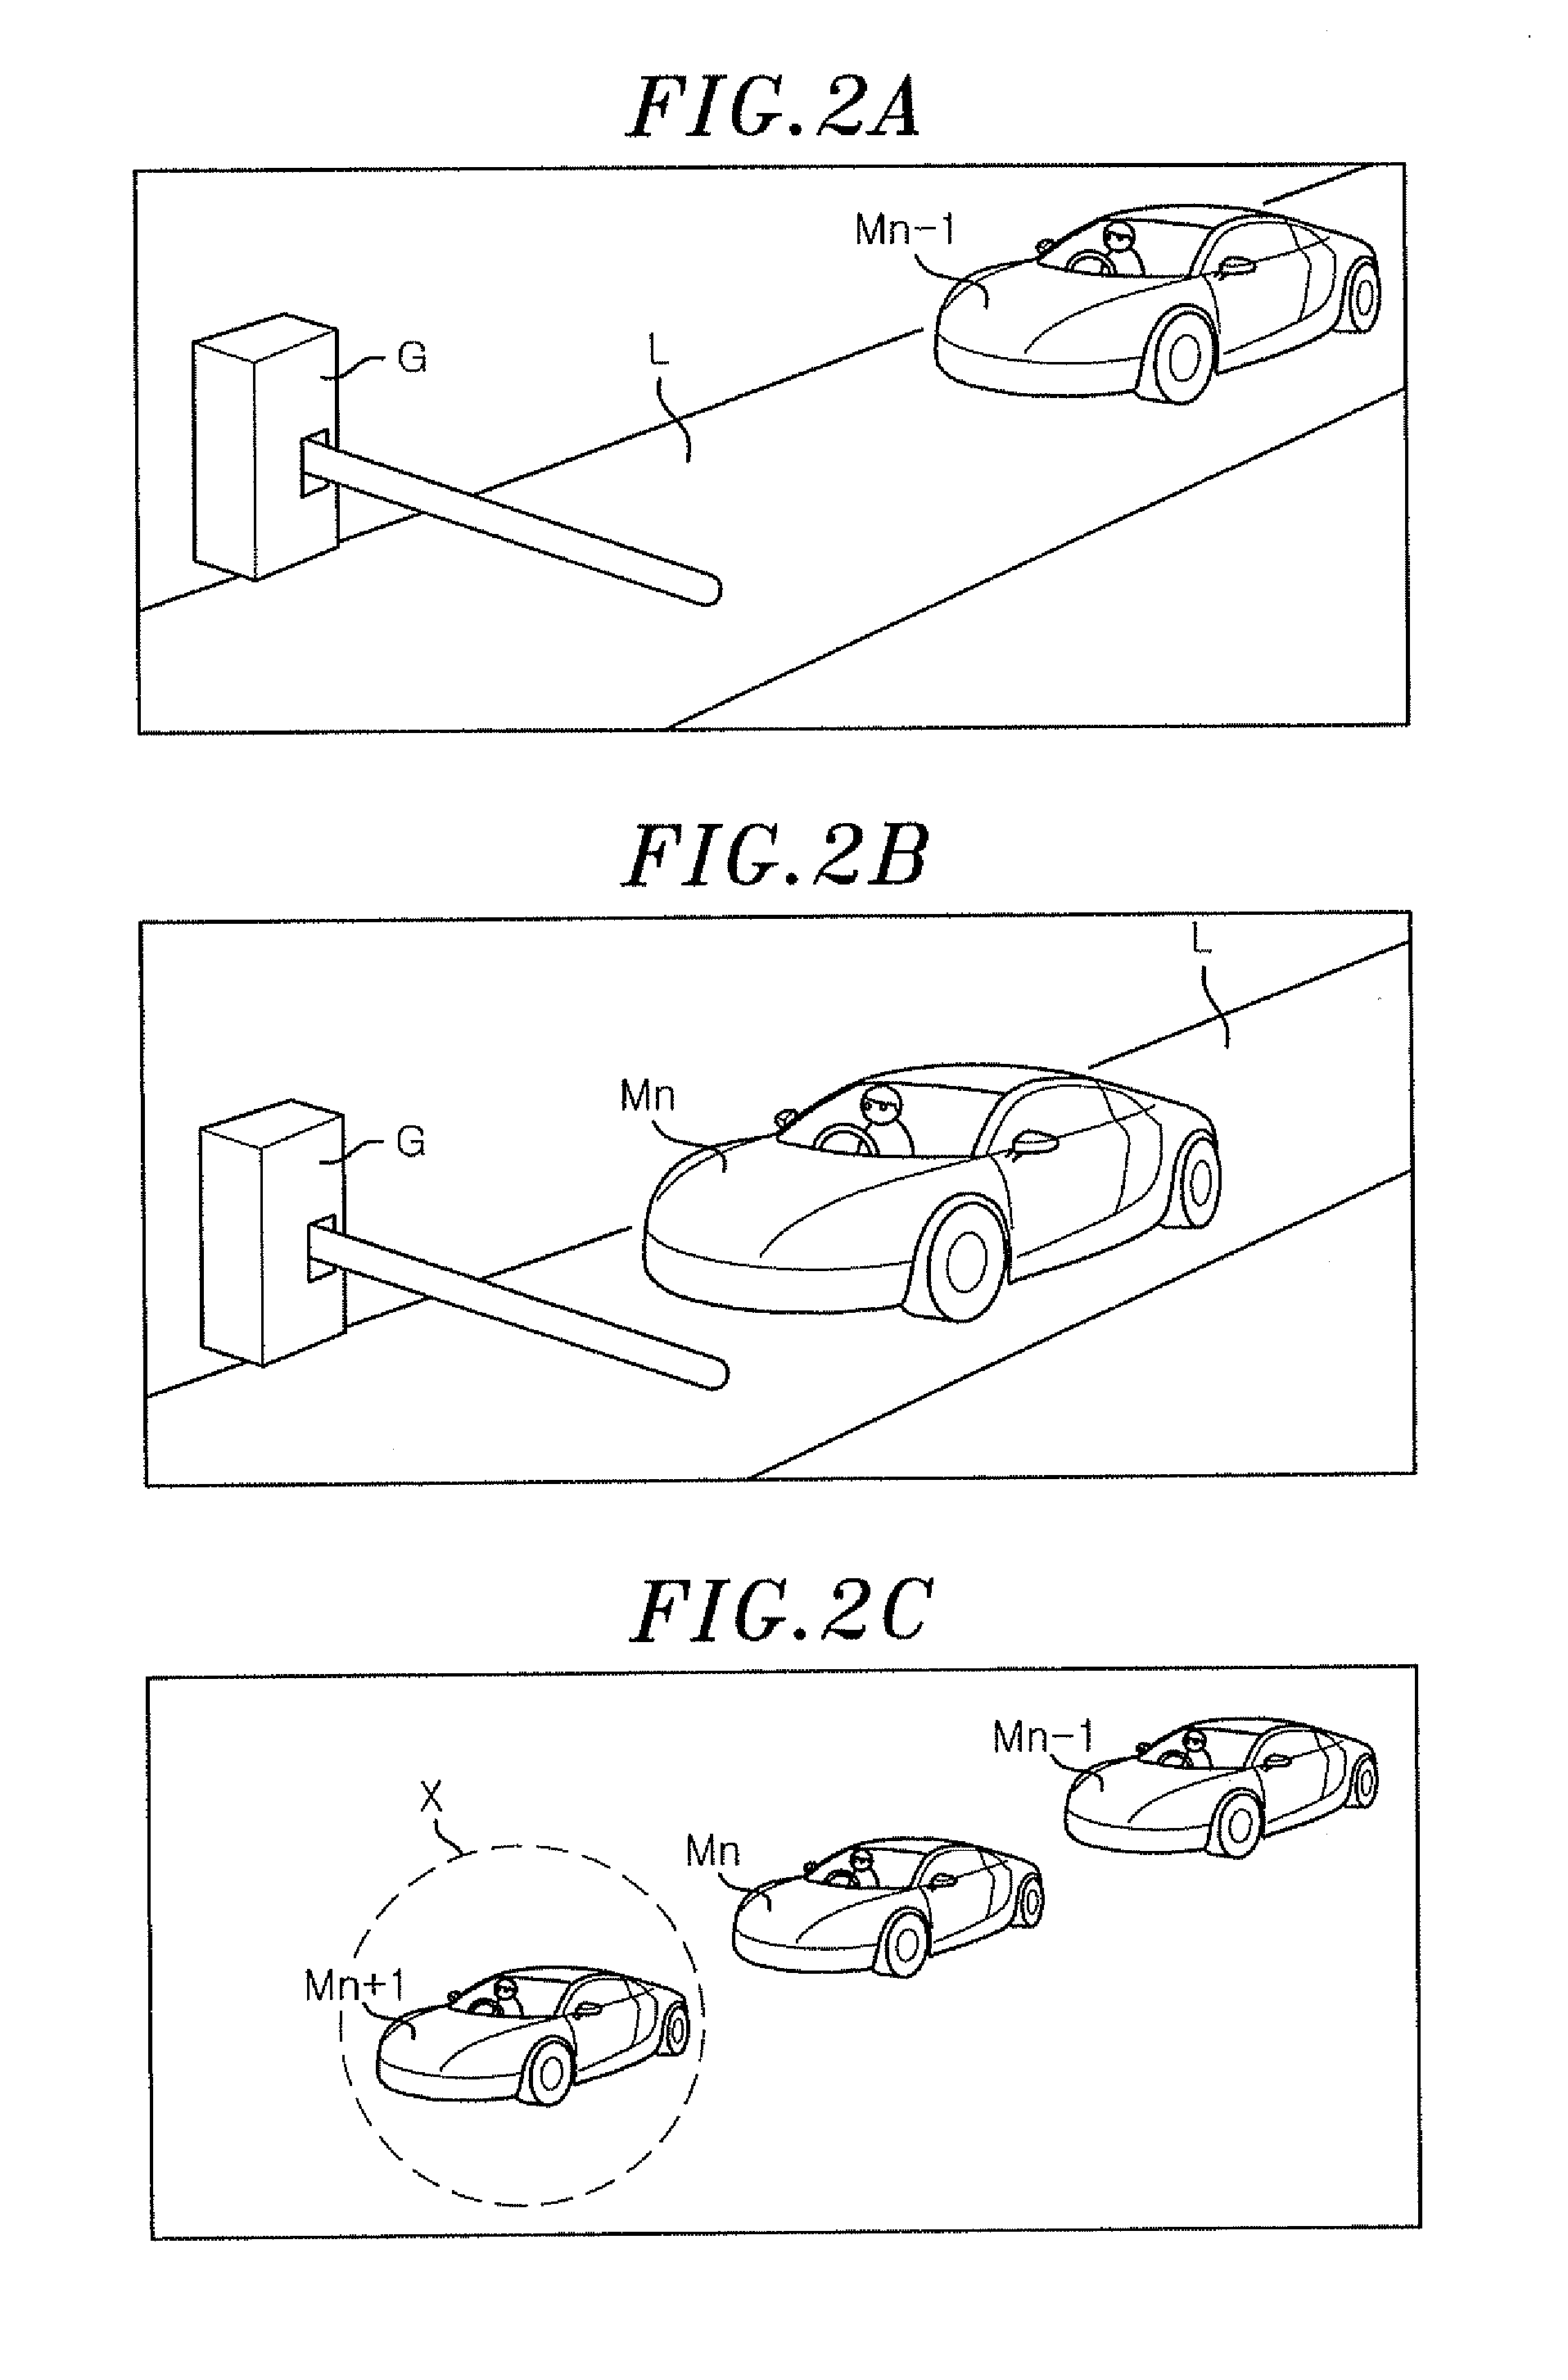 Imaging apparatus for taking a picture of a driver of a motor vehicle through a front glass of the motor vehicle